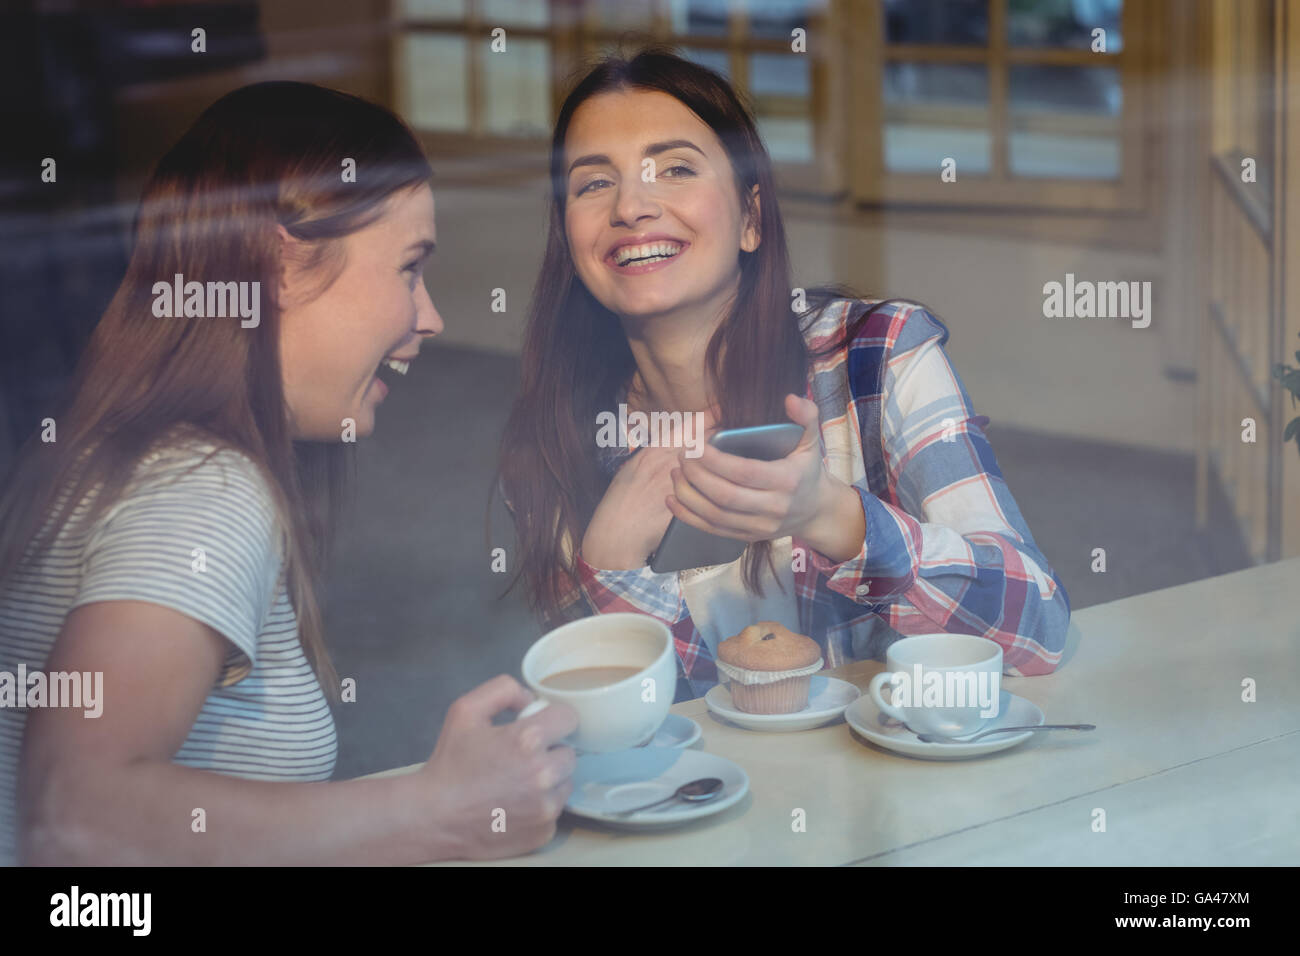 Cheerful women with cellphone at coffee shop Banque D'Images